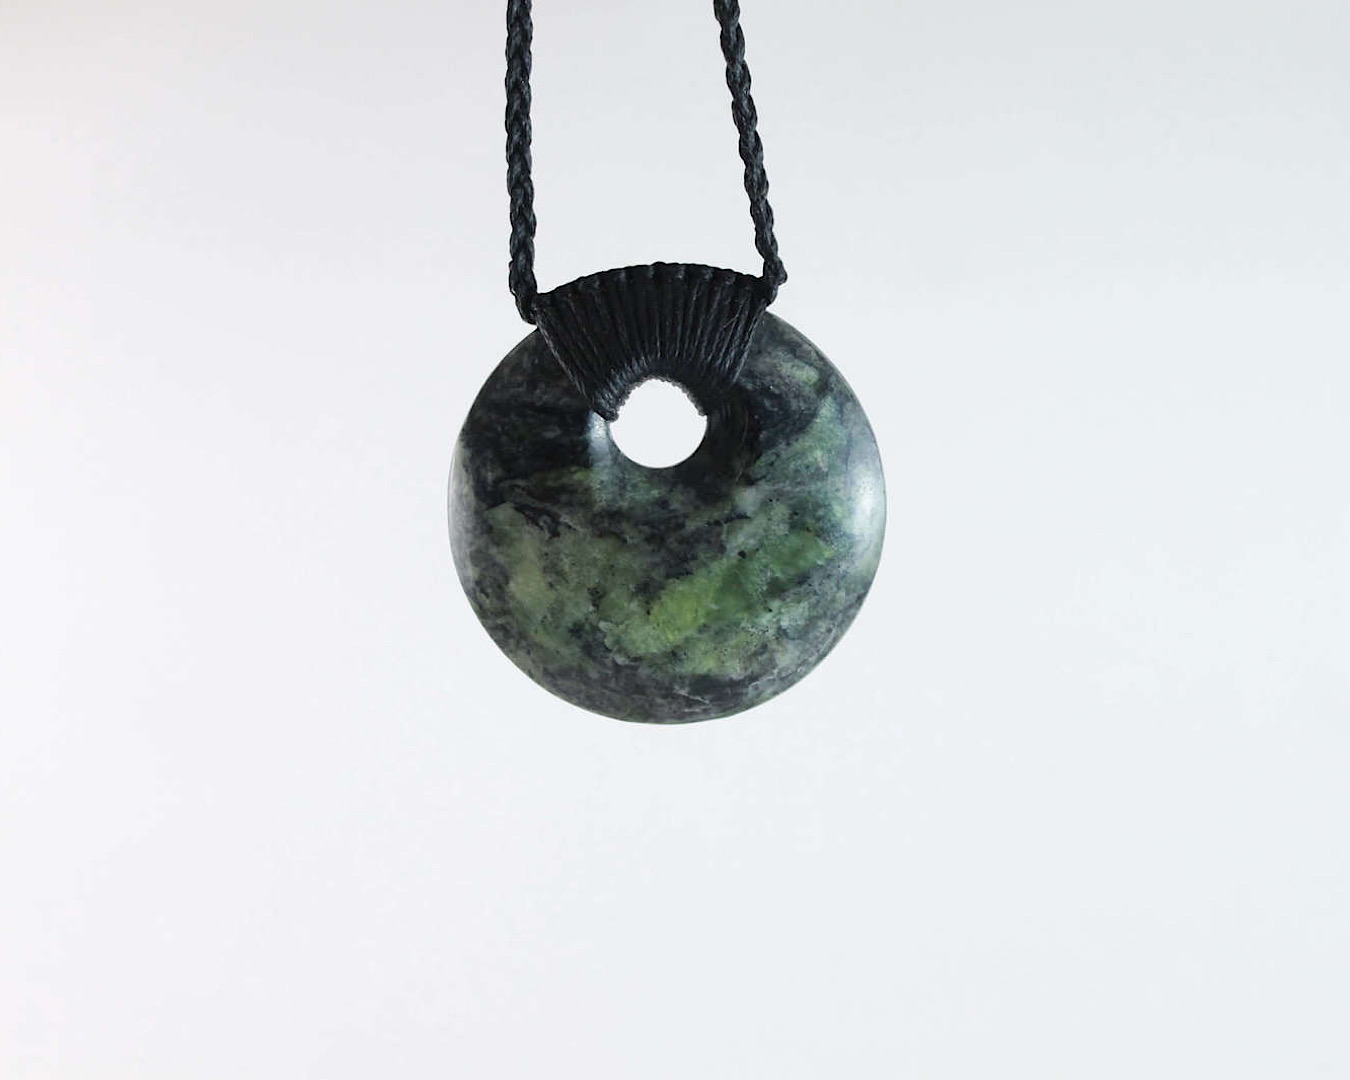 A circular greenstone pounamu pendant with a hole in the middle of it hangs on a necklace string.